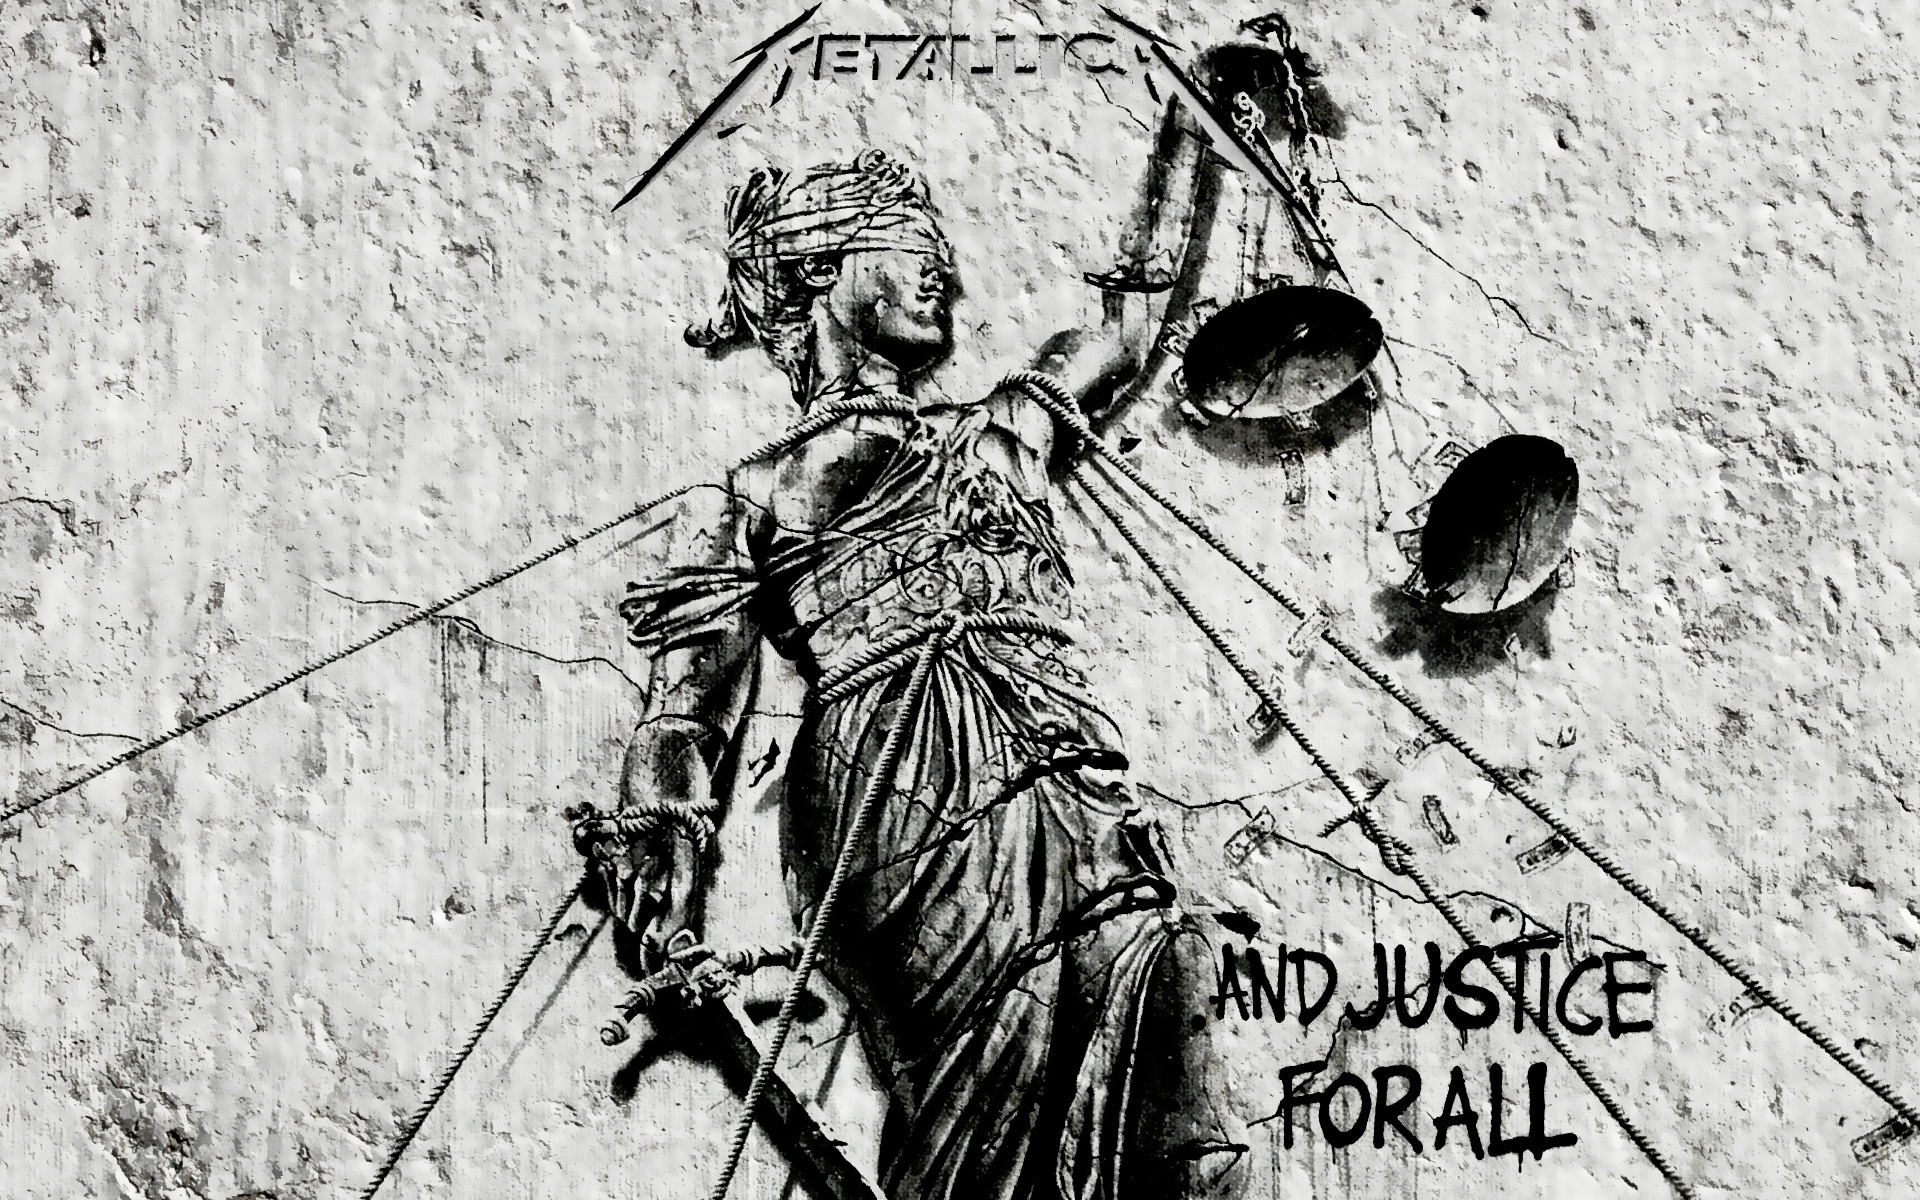 Metallica Wallpaper And Justice For All - HD Wallpaper 